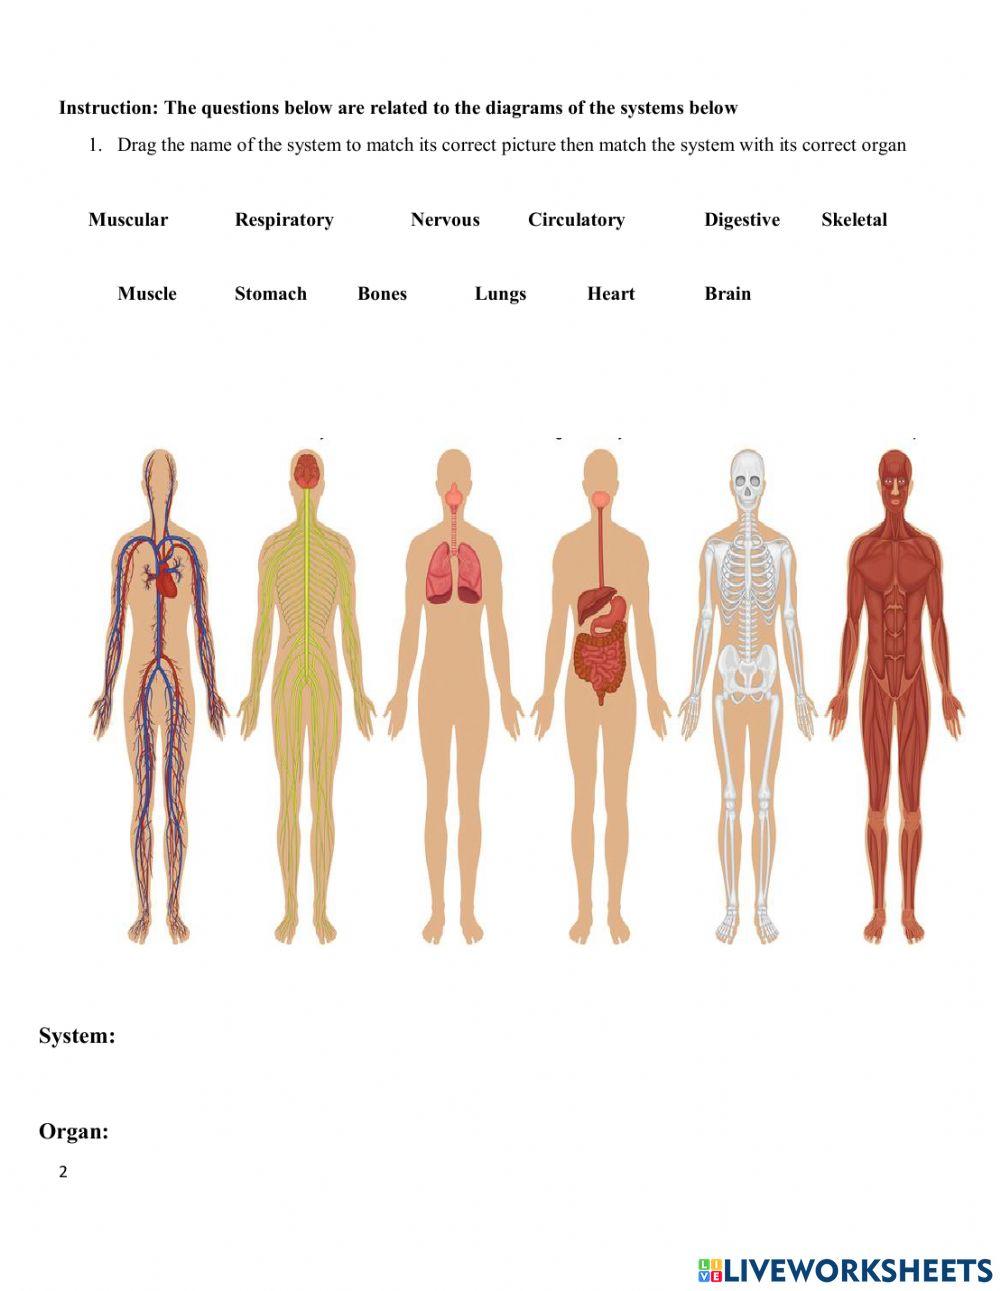 Organs and Body systems